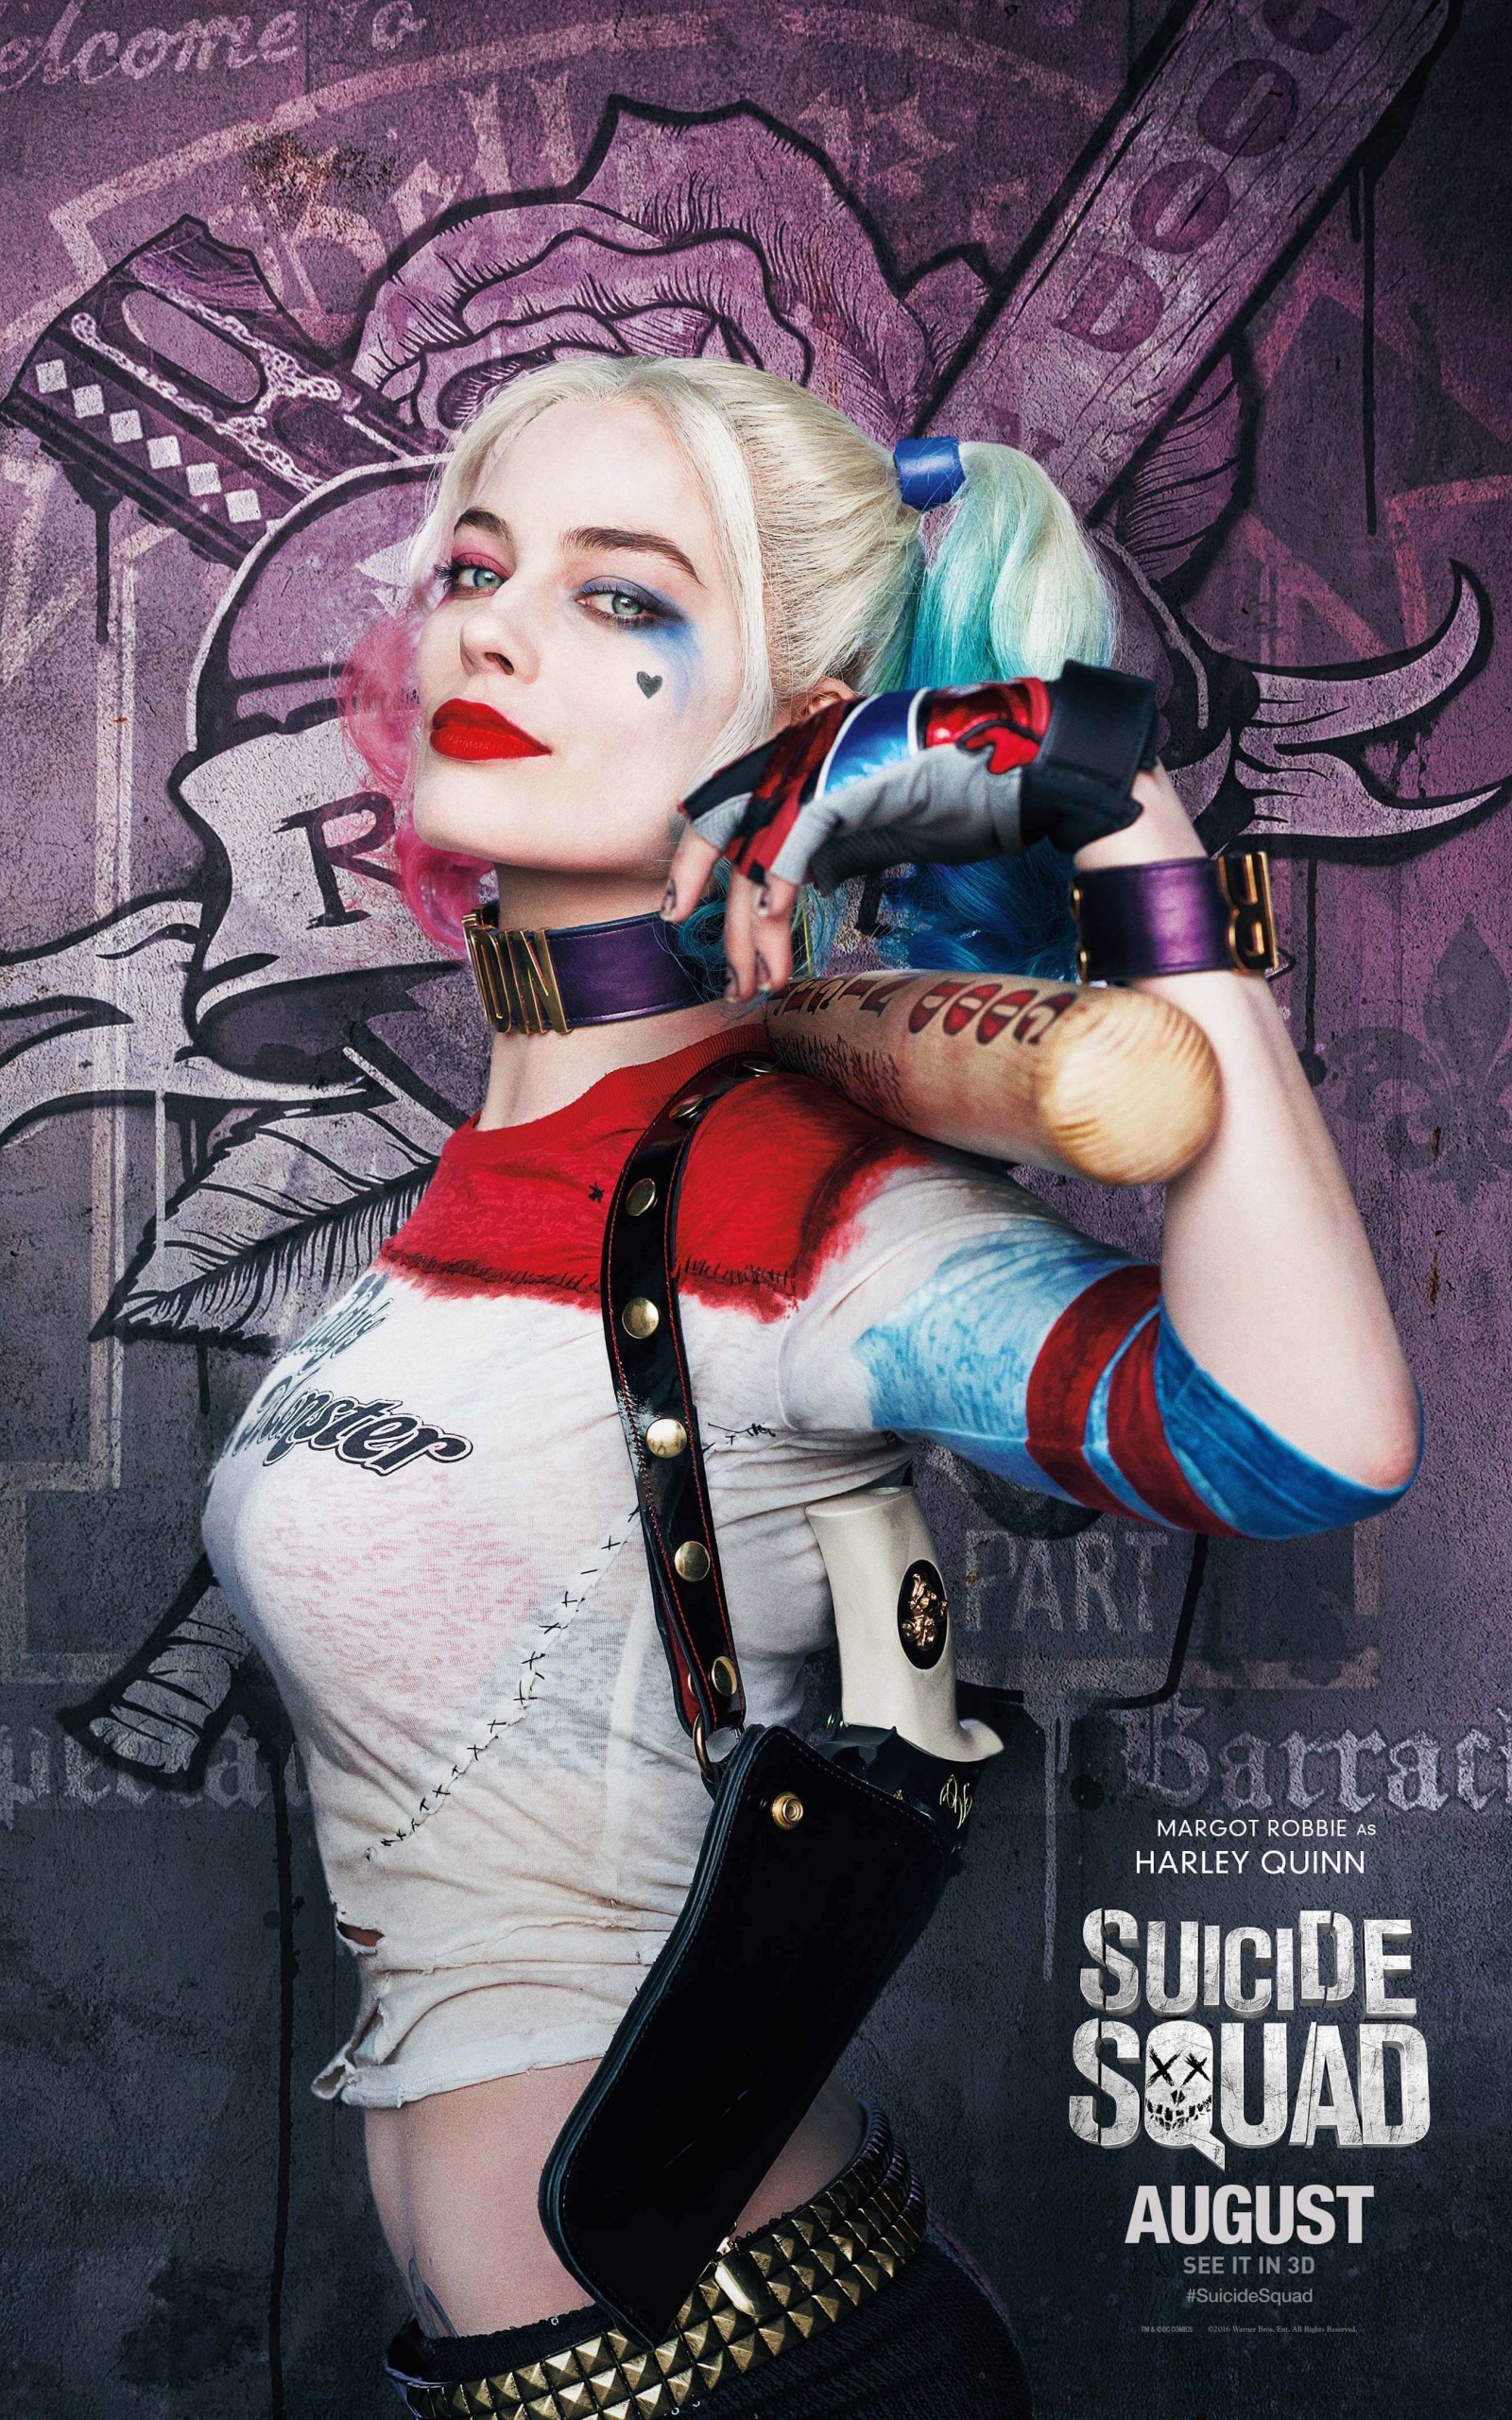 Harley Quinn - Suicide Squad Wallpaper for Amazon Kindle Fire HDX 8.9